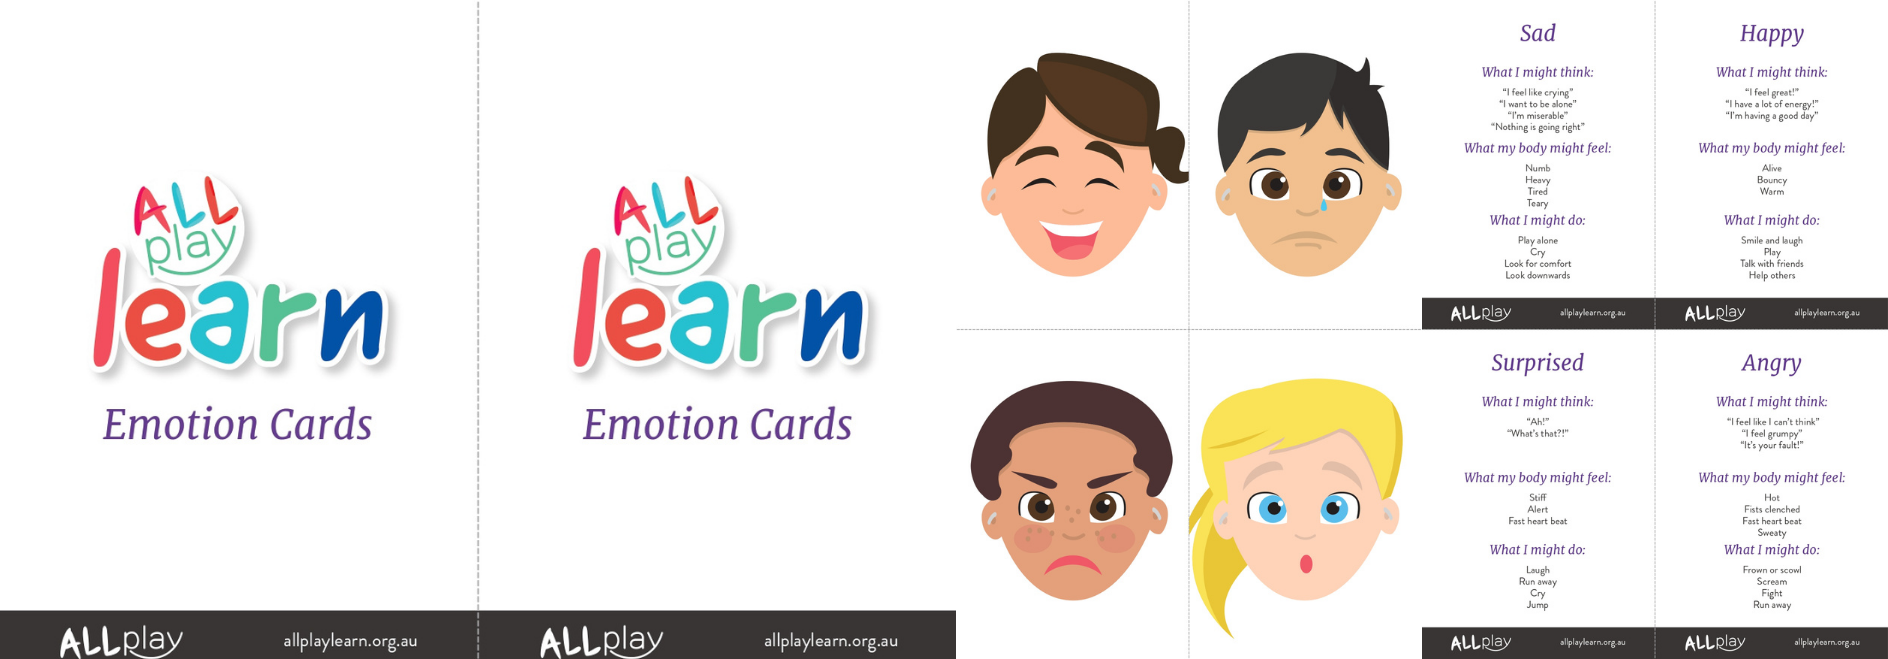 Emotion cards feature